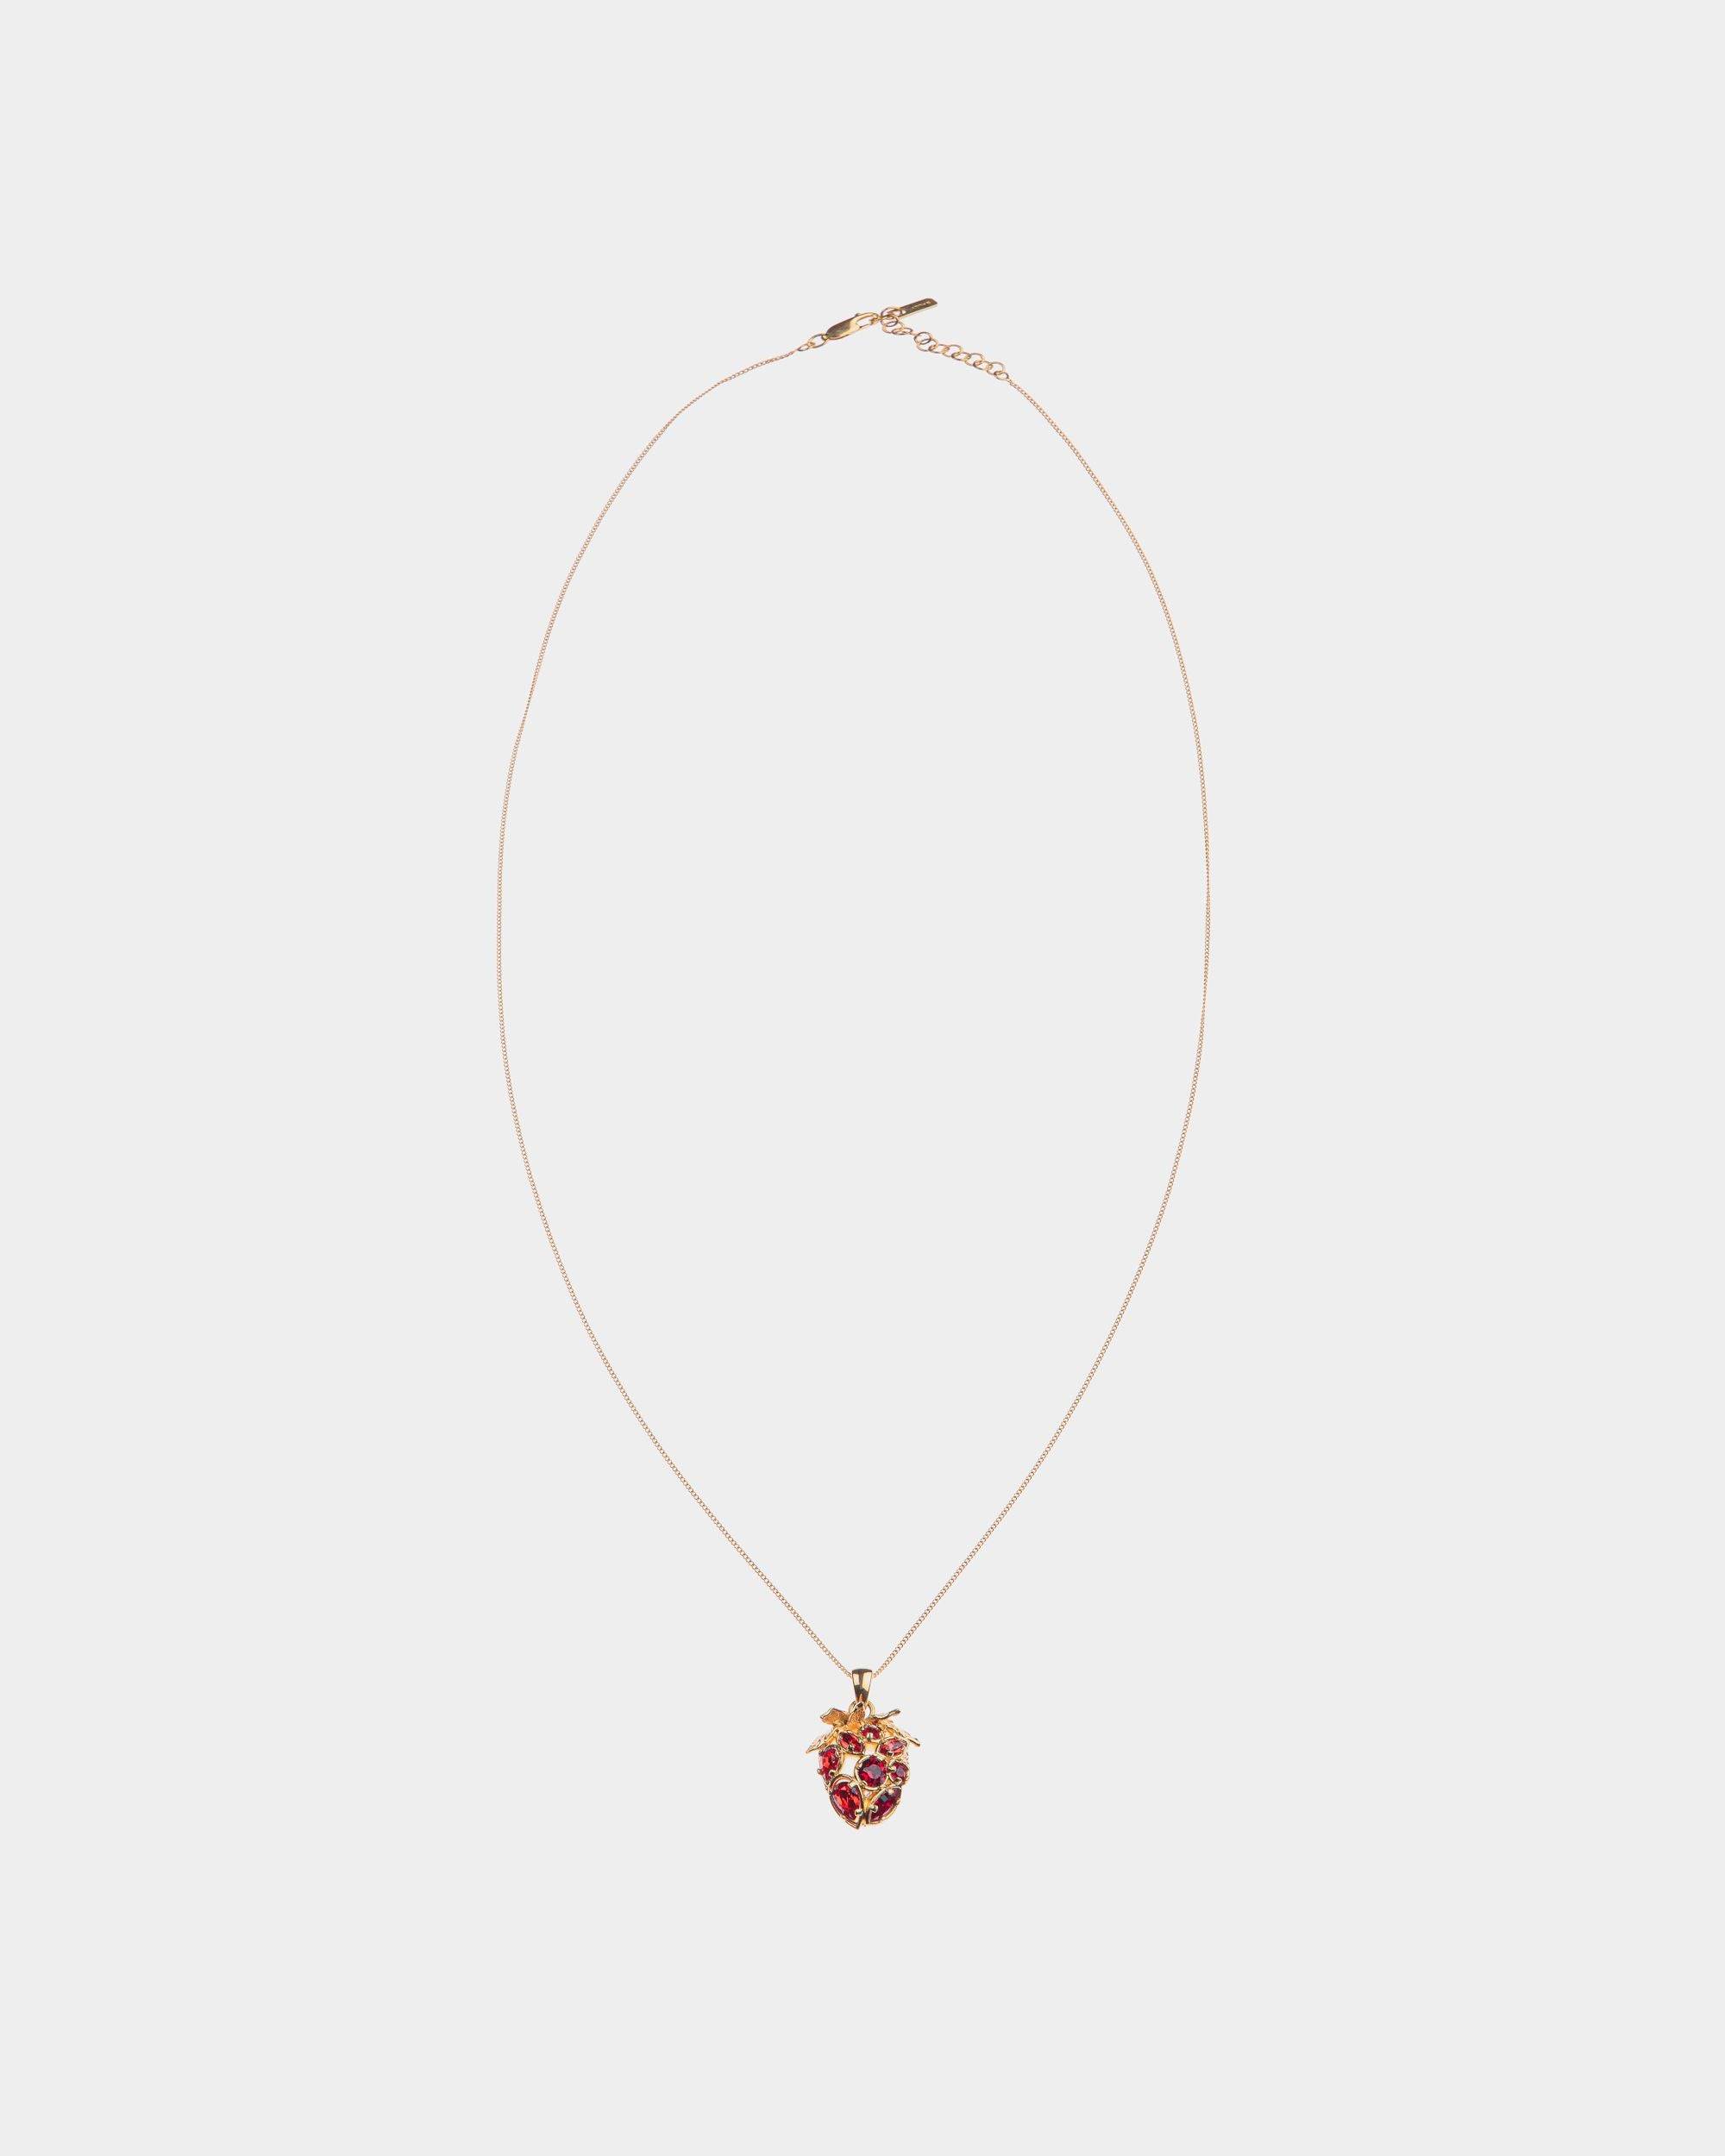 Deco | Women's Necklace in Gold Eco Brass and Crystals | Bally | Still Life Front